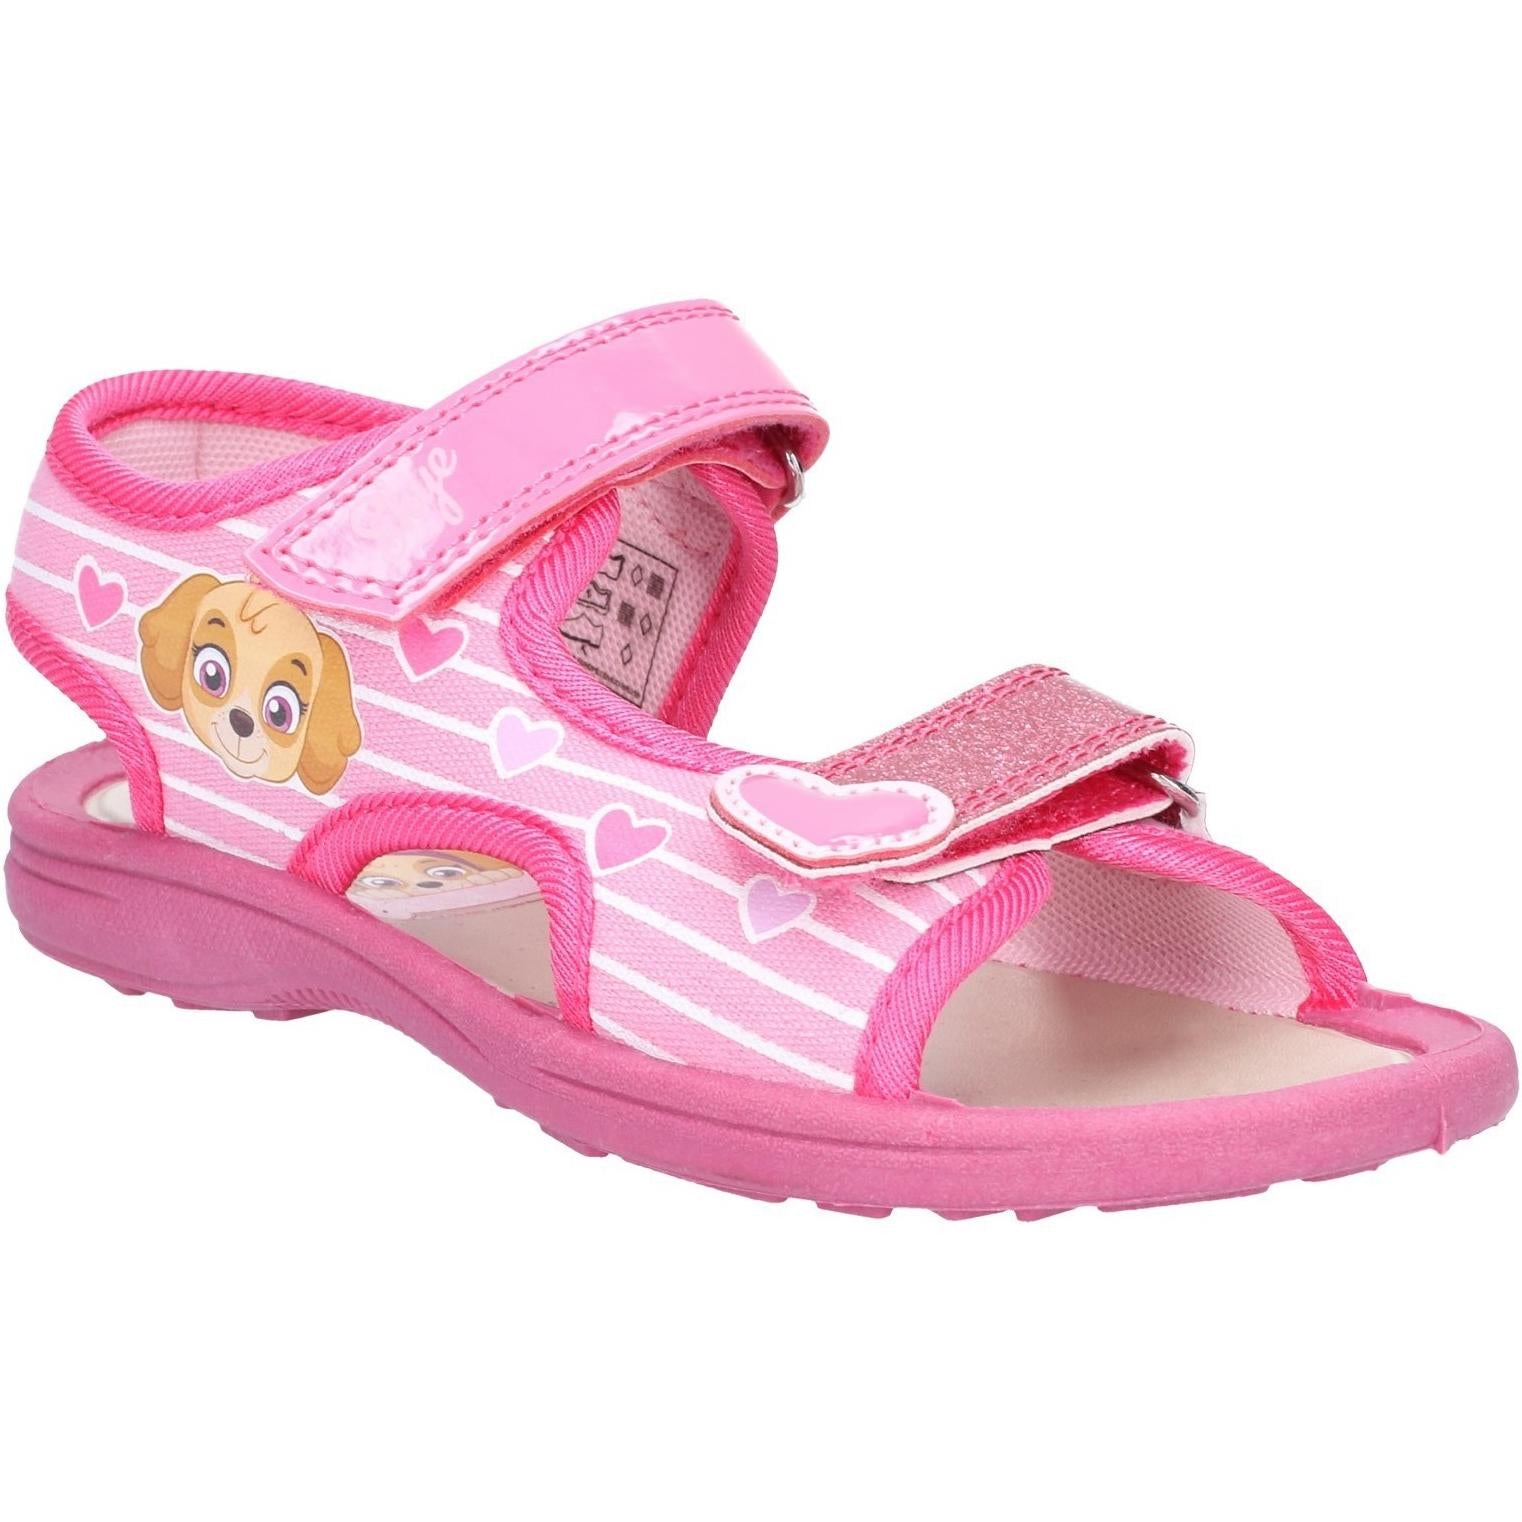 Leomil Paw Patrol Classic Sandals Touch Fastening Shoe